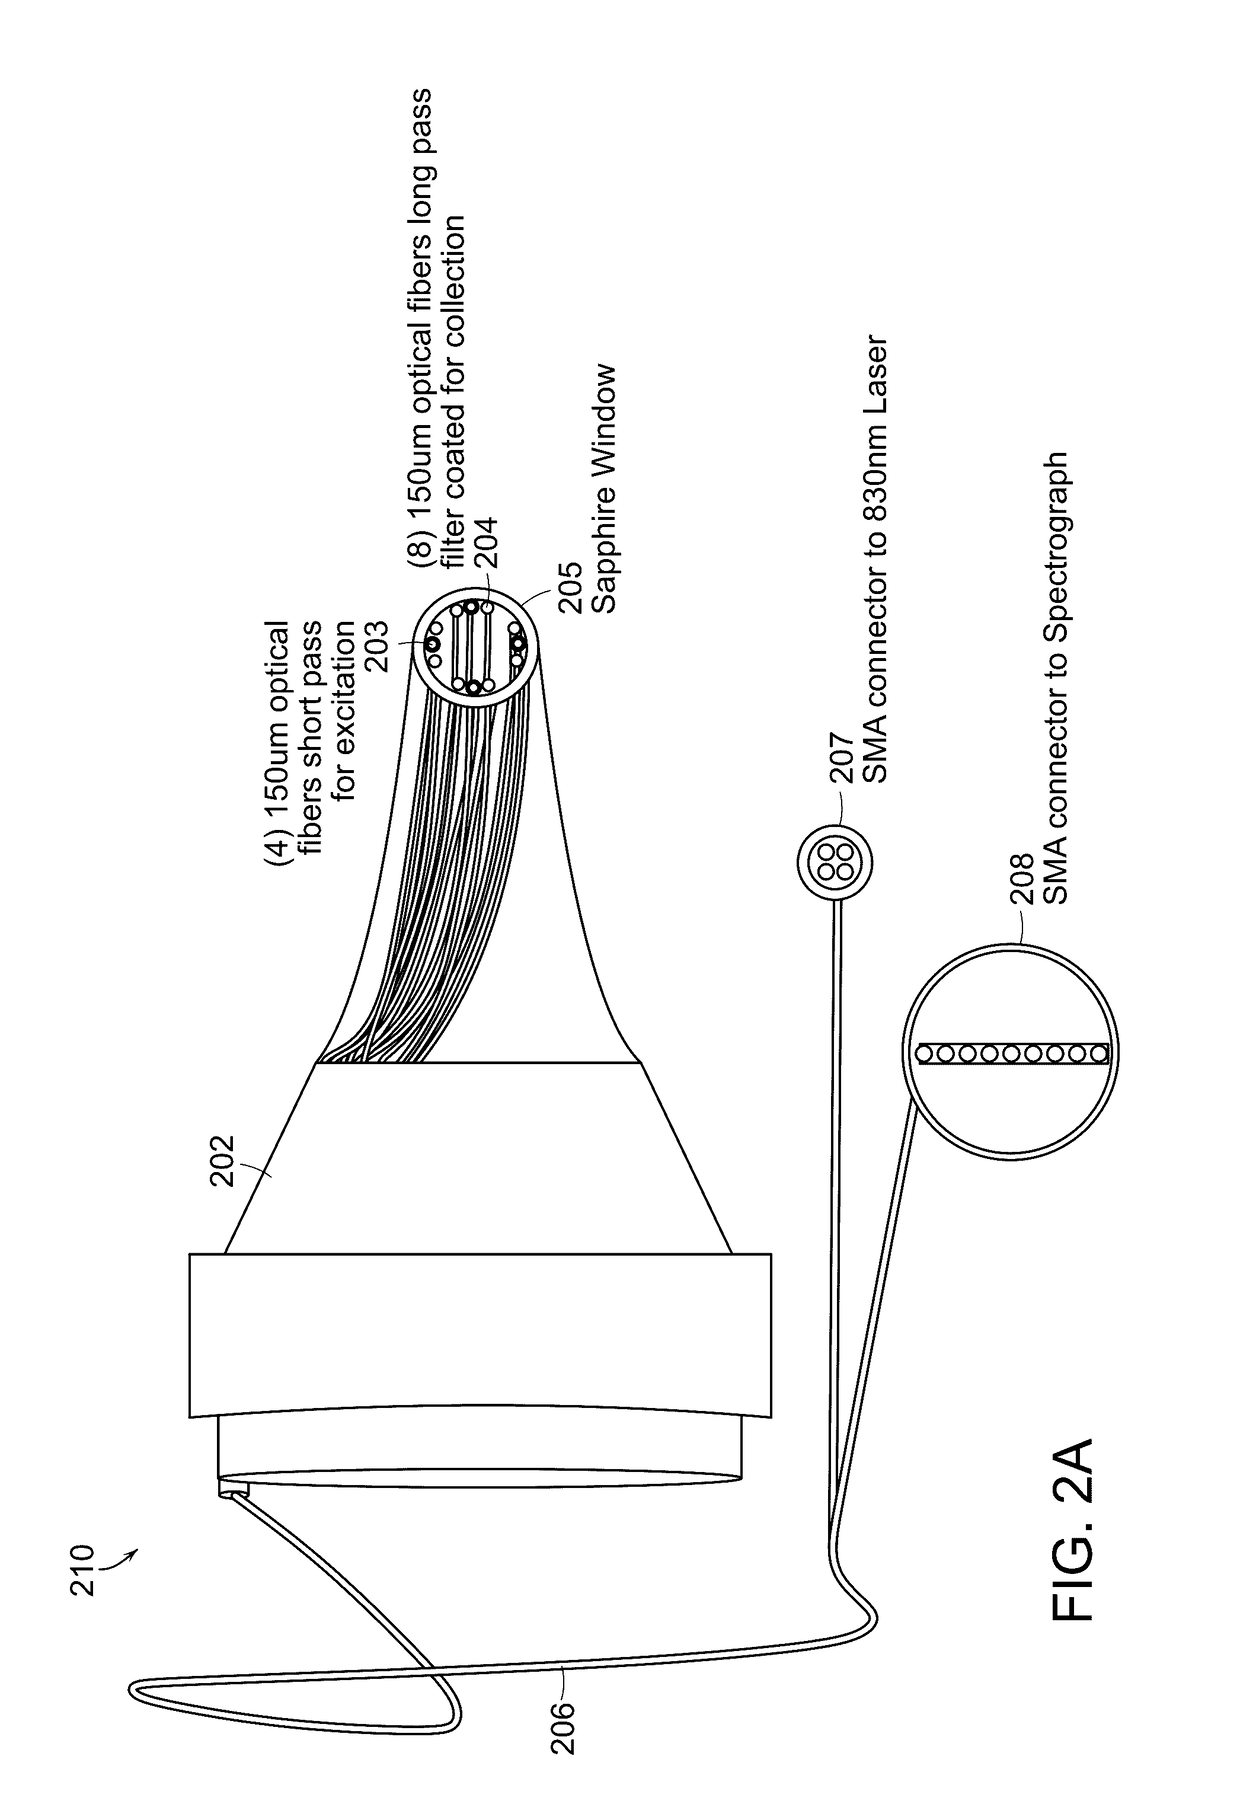 Systems and methods for diagnosis of middle ear conditions and detection of analytes in the tympanic membrane